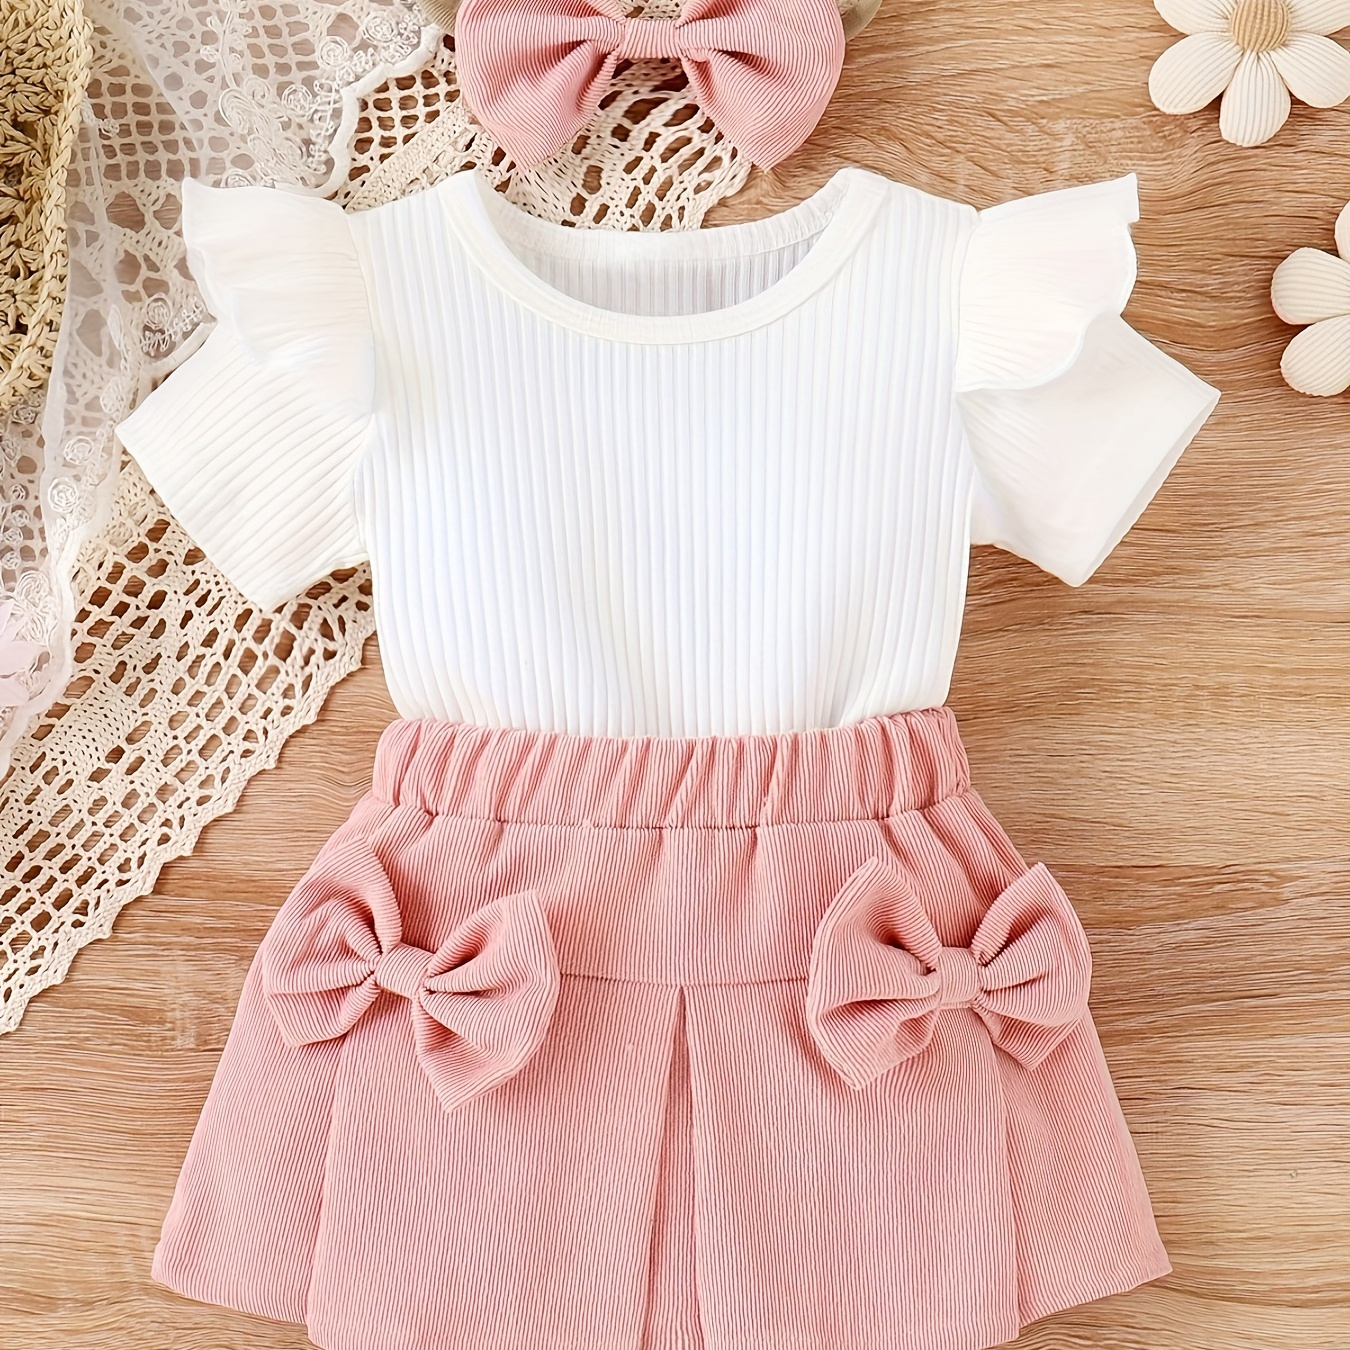 

Baby's Lovely Bowknot Decor 2pcs Outfit, Ruffle Decor Solid Color Ribbed Top & Bowknot Headband & Corduroy Skirt Set, Toddler & Infant Girl's Clothes